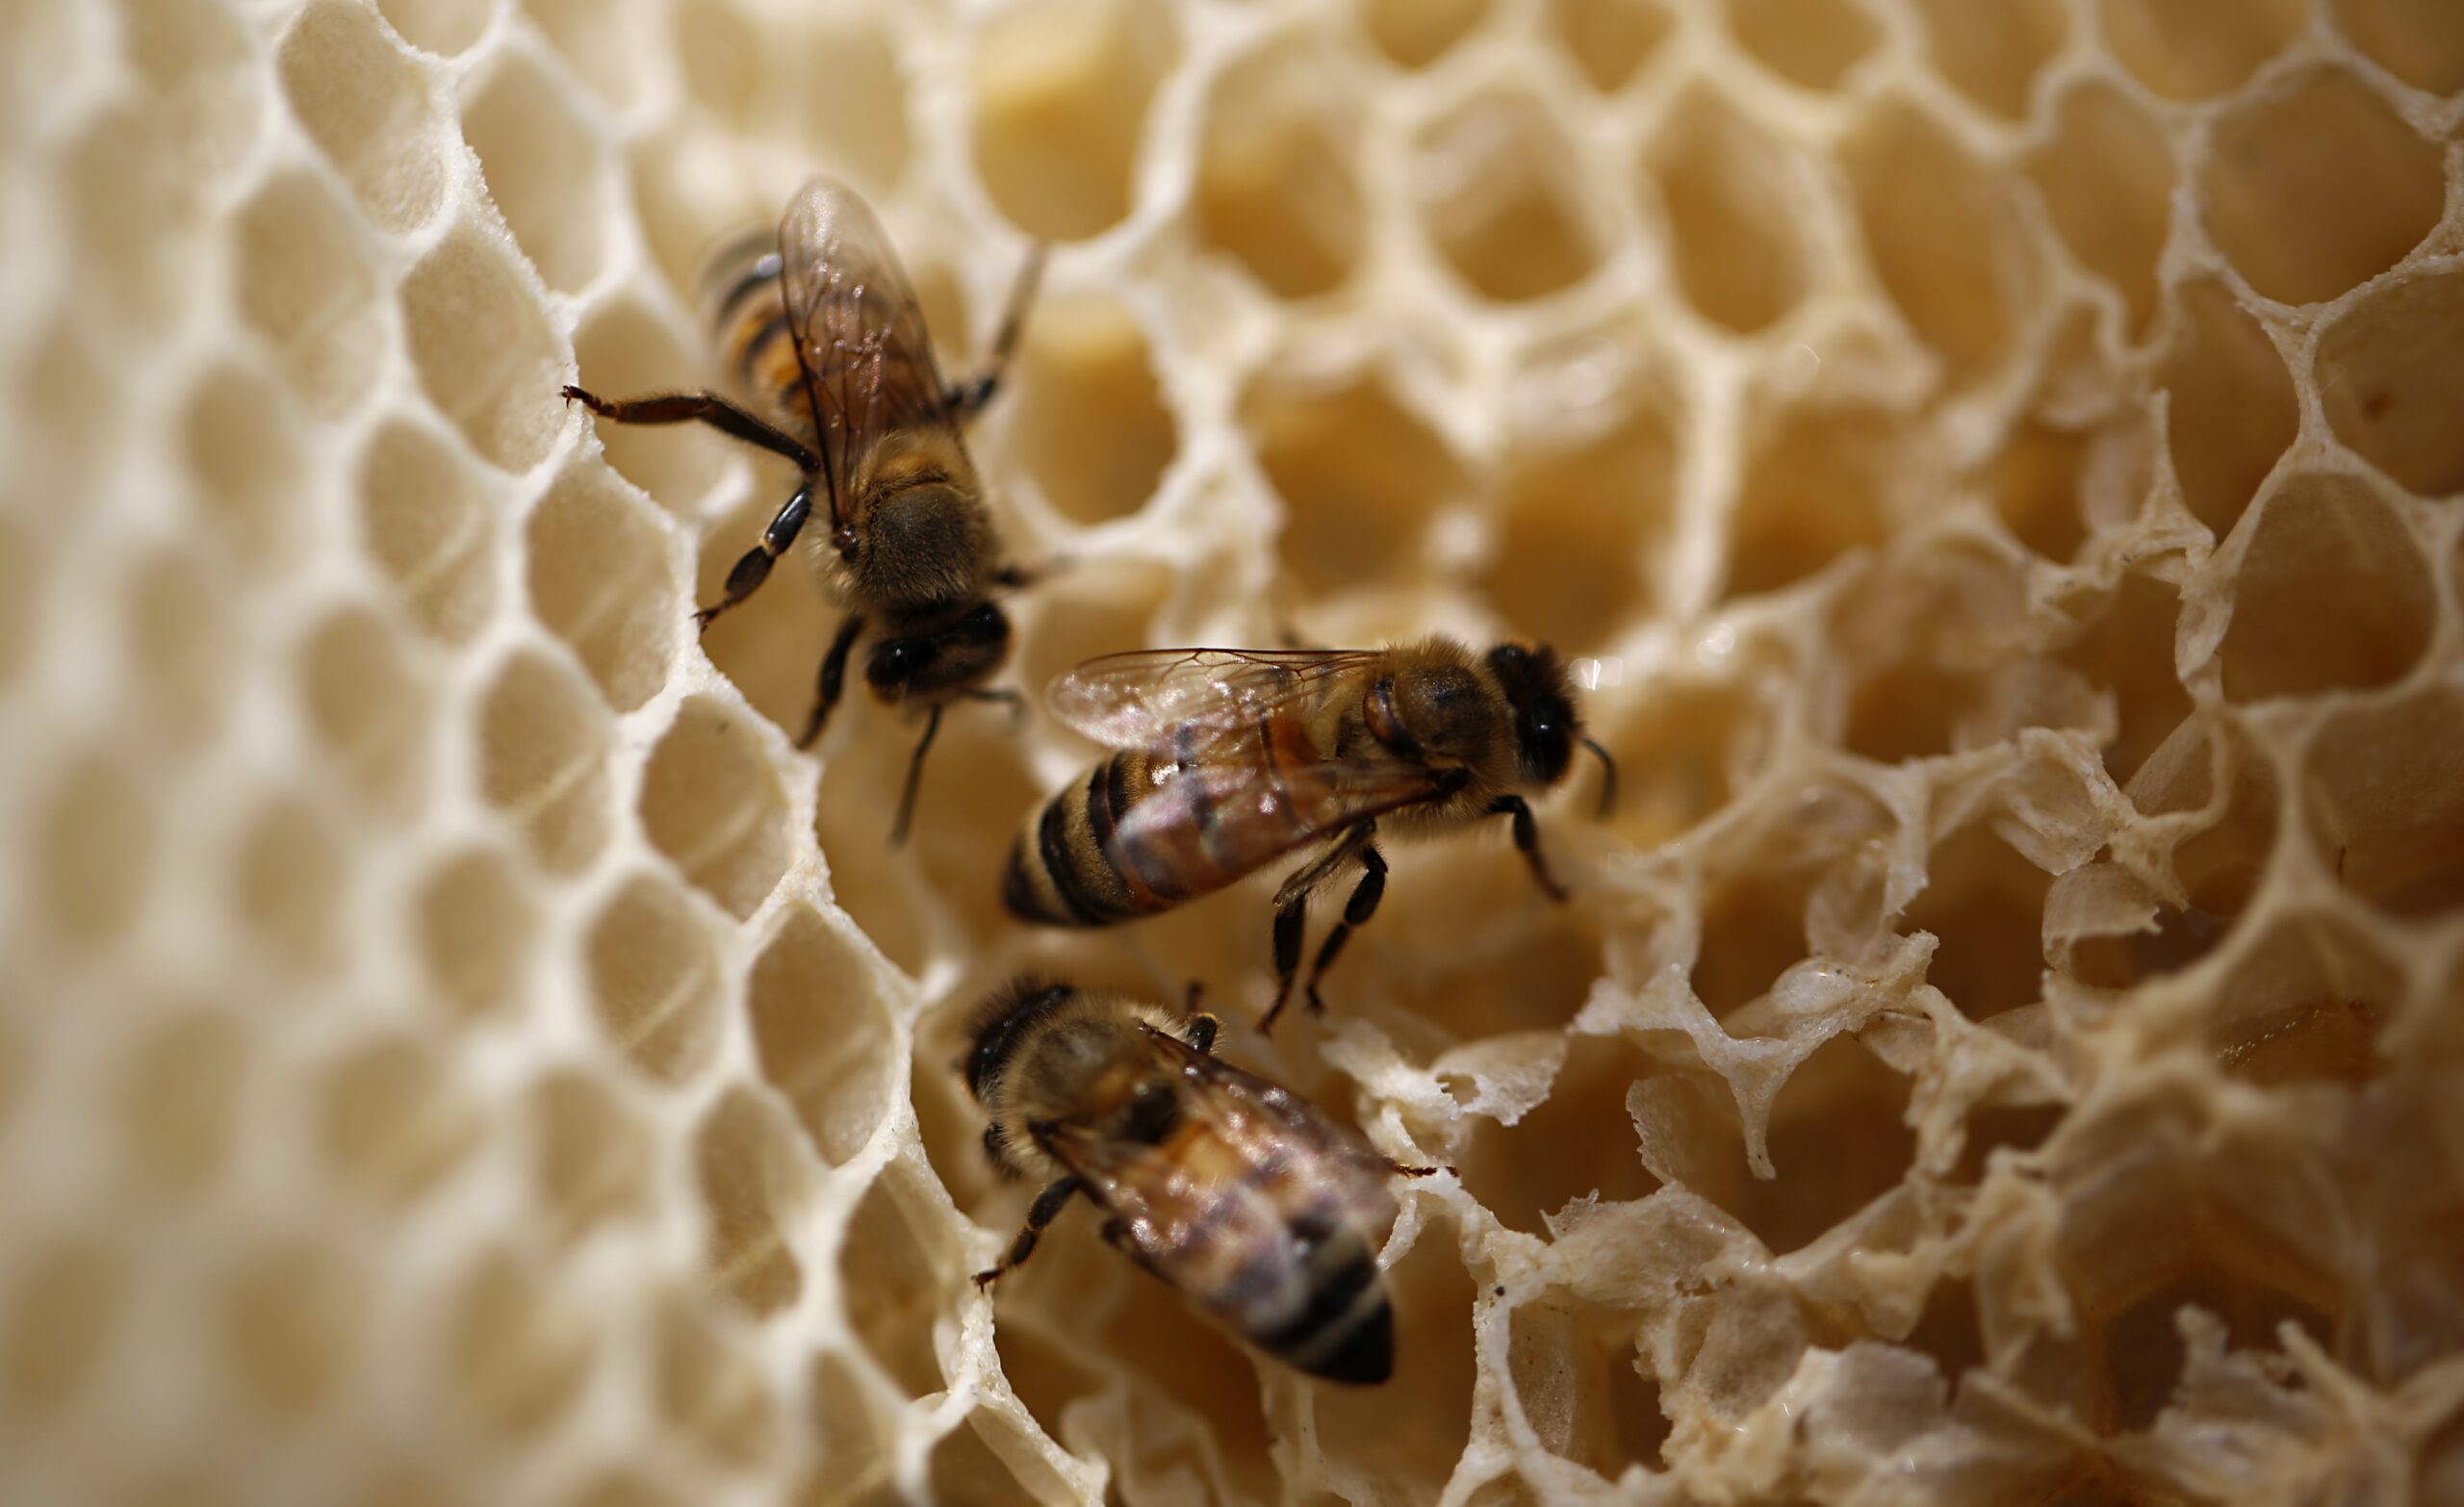 While Honey Production Continues To Decline, Wild Honey Bees Appear To Be Thriving